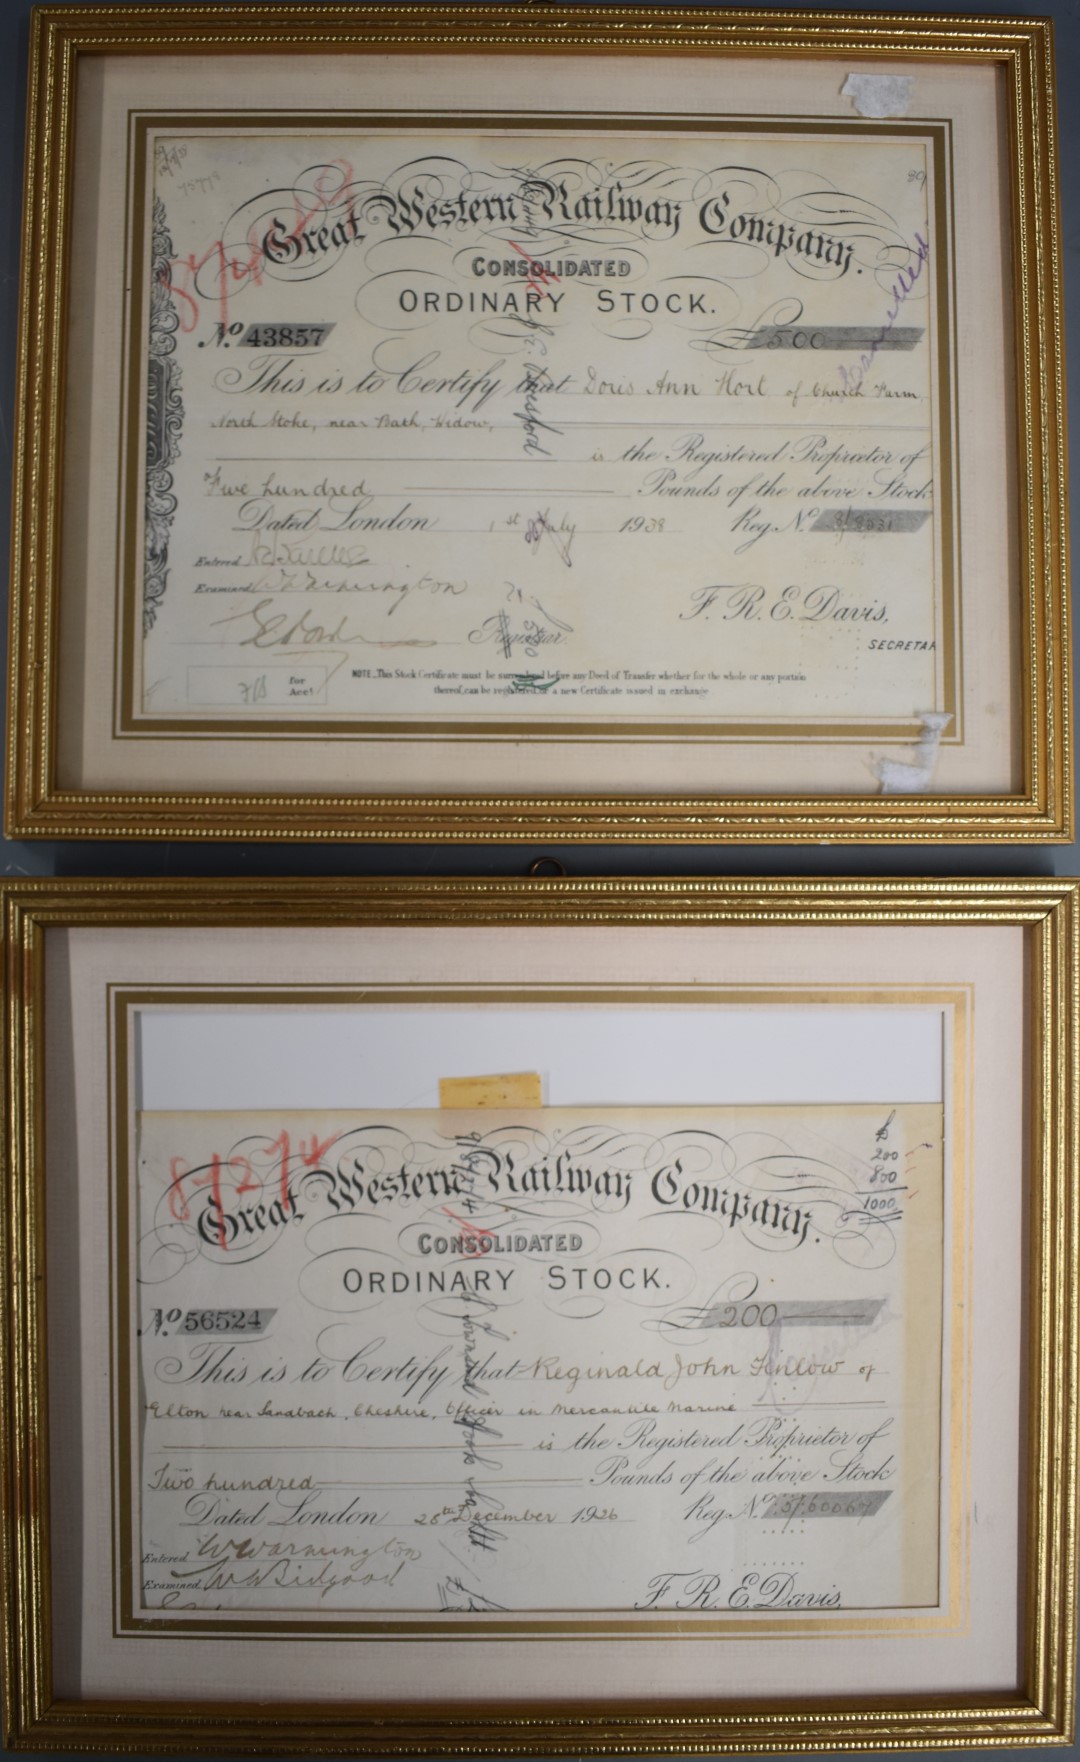 Two Great Western Railway Company GWR share certificates, one 1926 for £200, the other 1938 for £